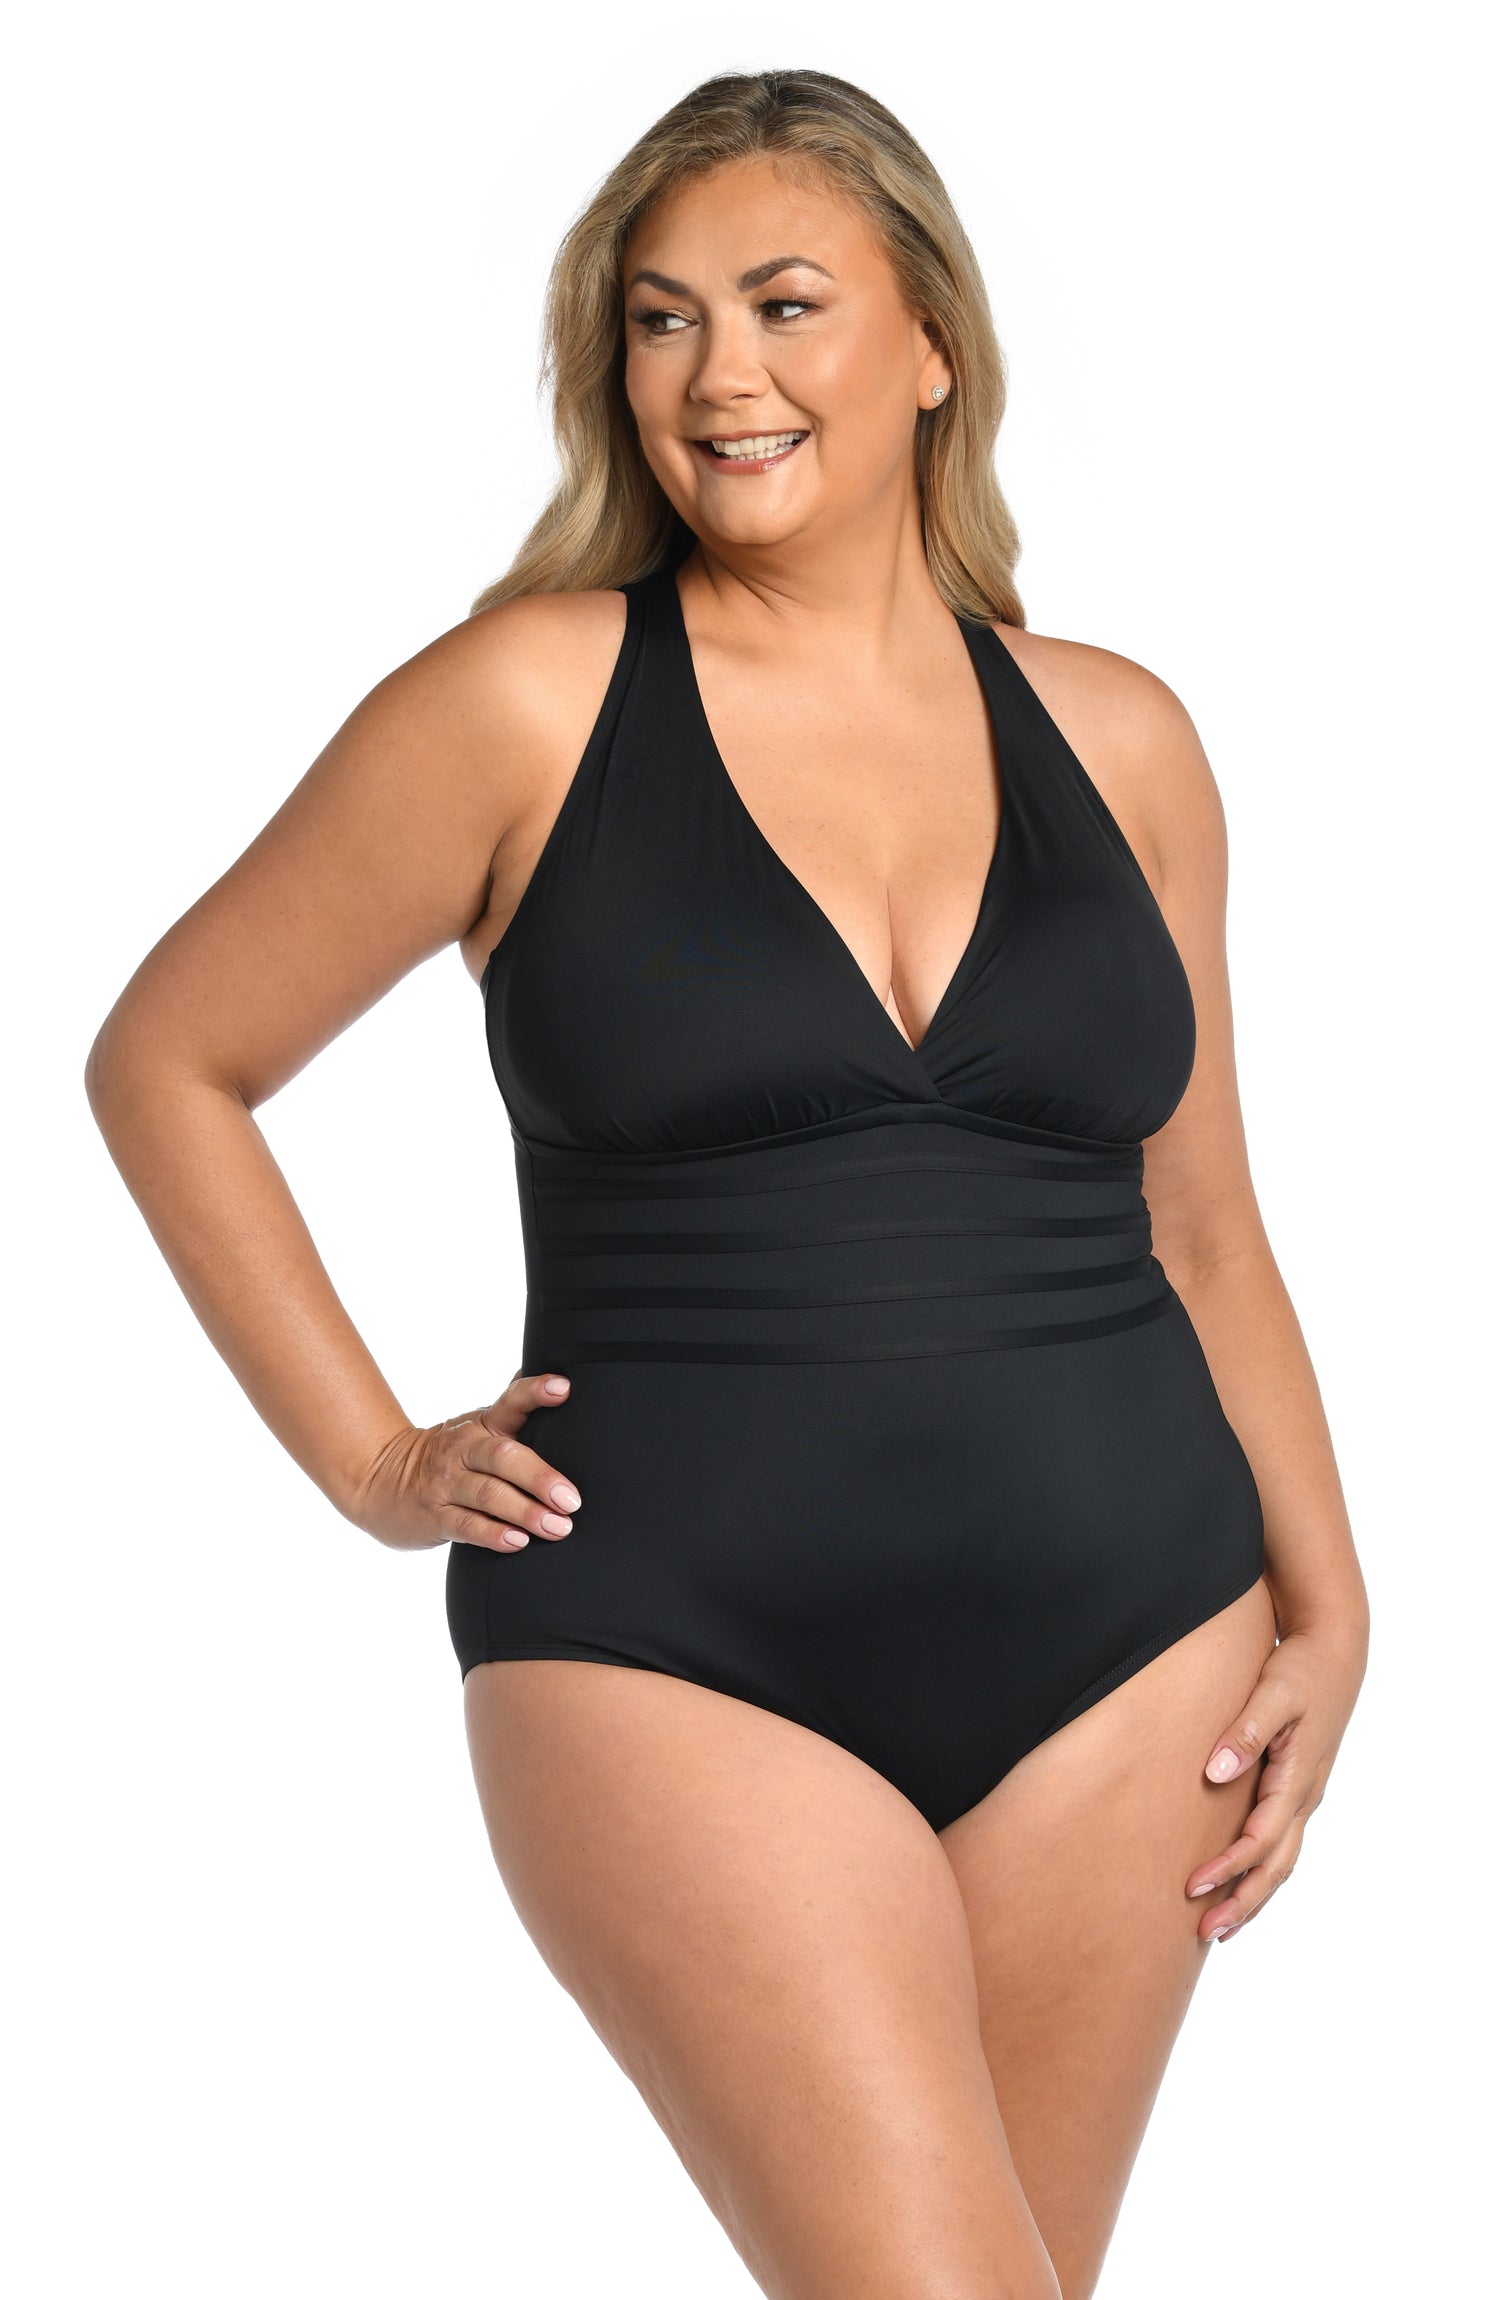 Model is wearing a black one piece swimsuit from our Best-Selling Island Goddess collection.